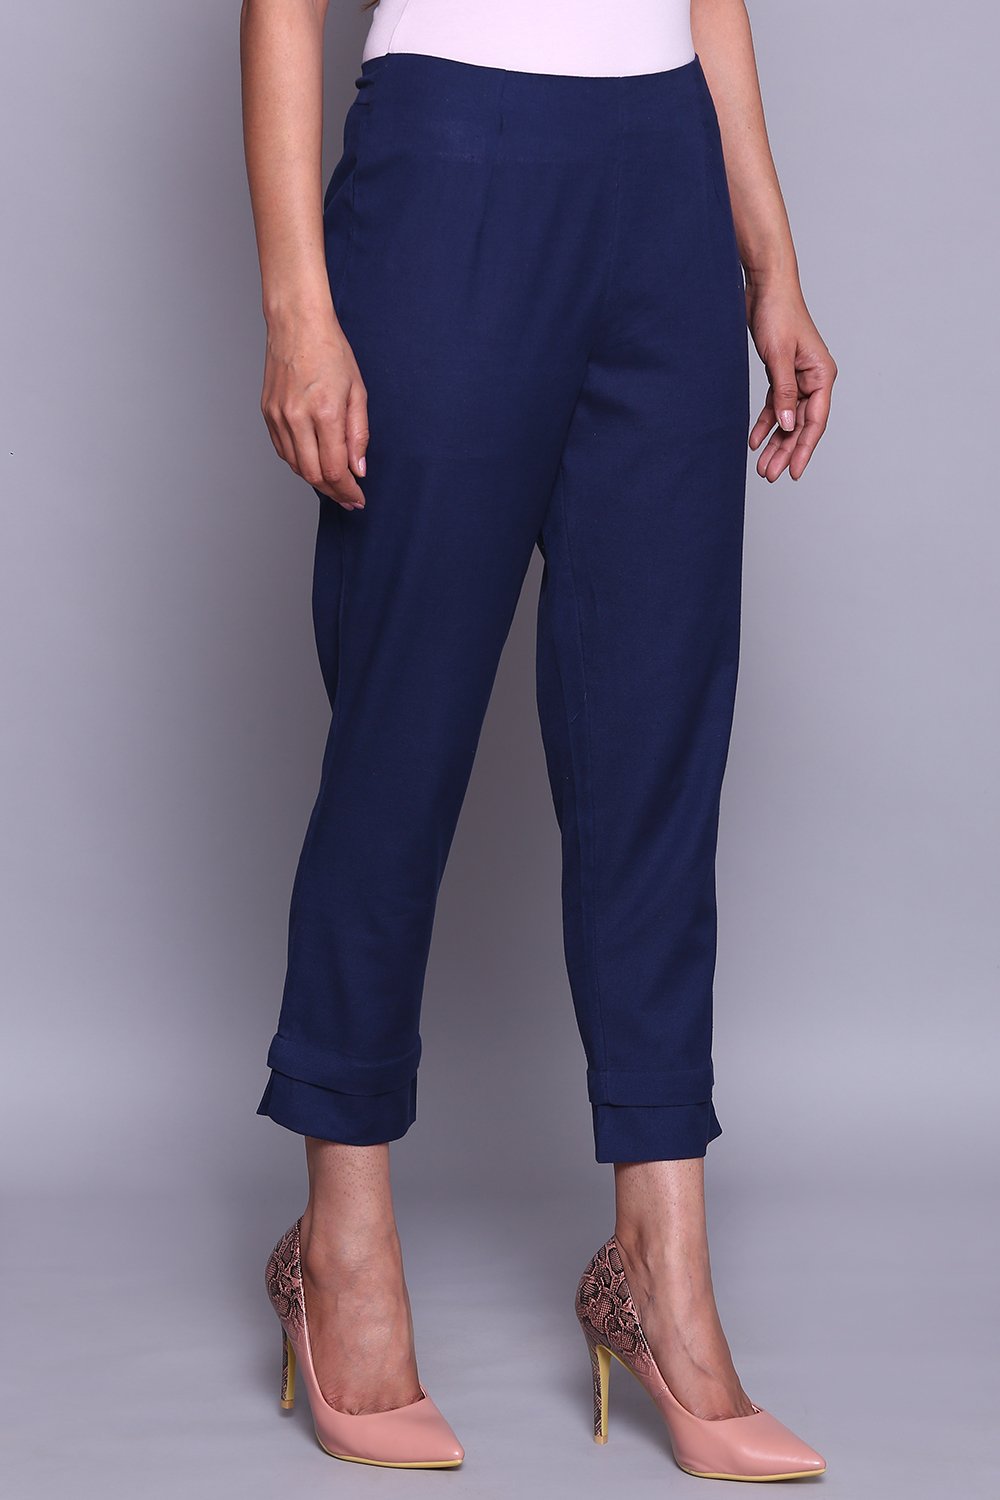 Navy Blue Cotton Flax Pants image number 0